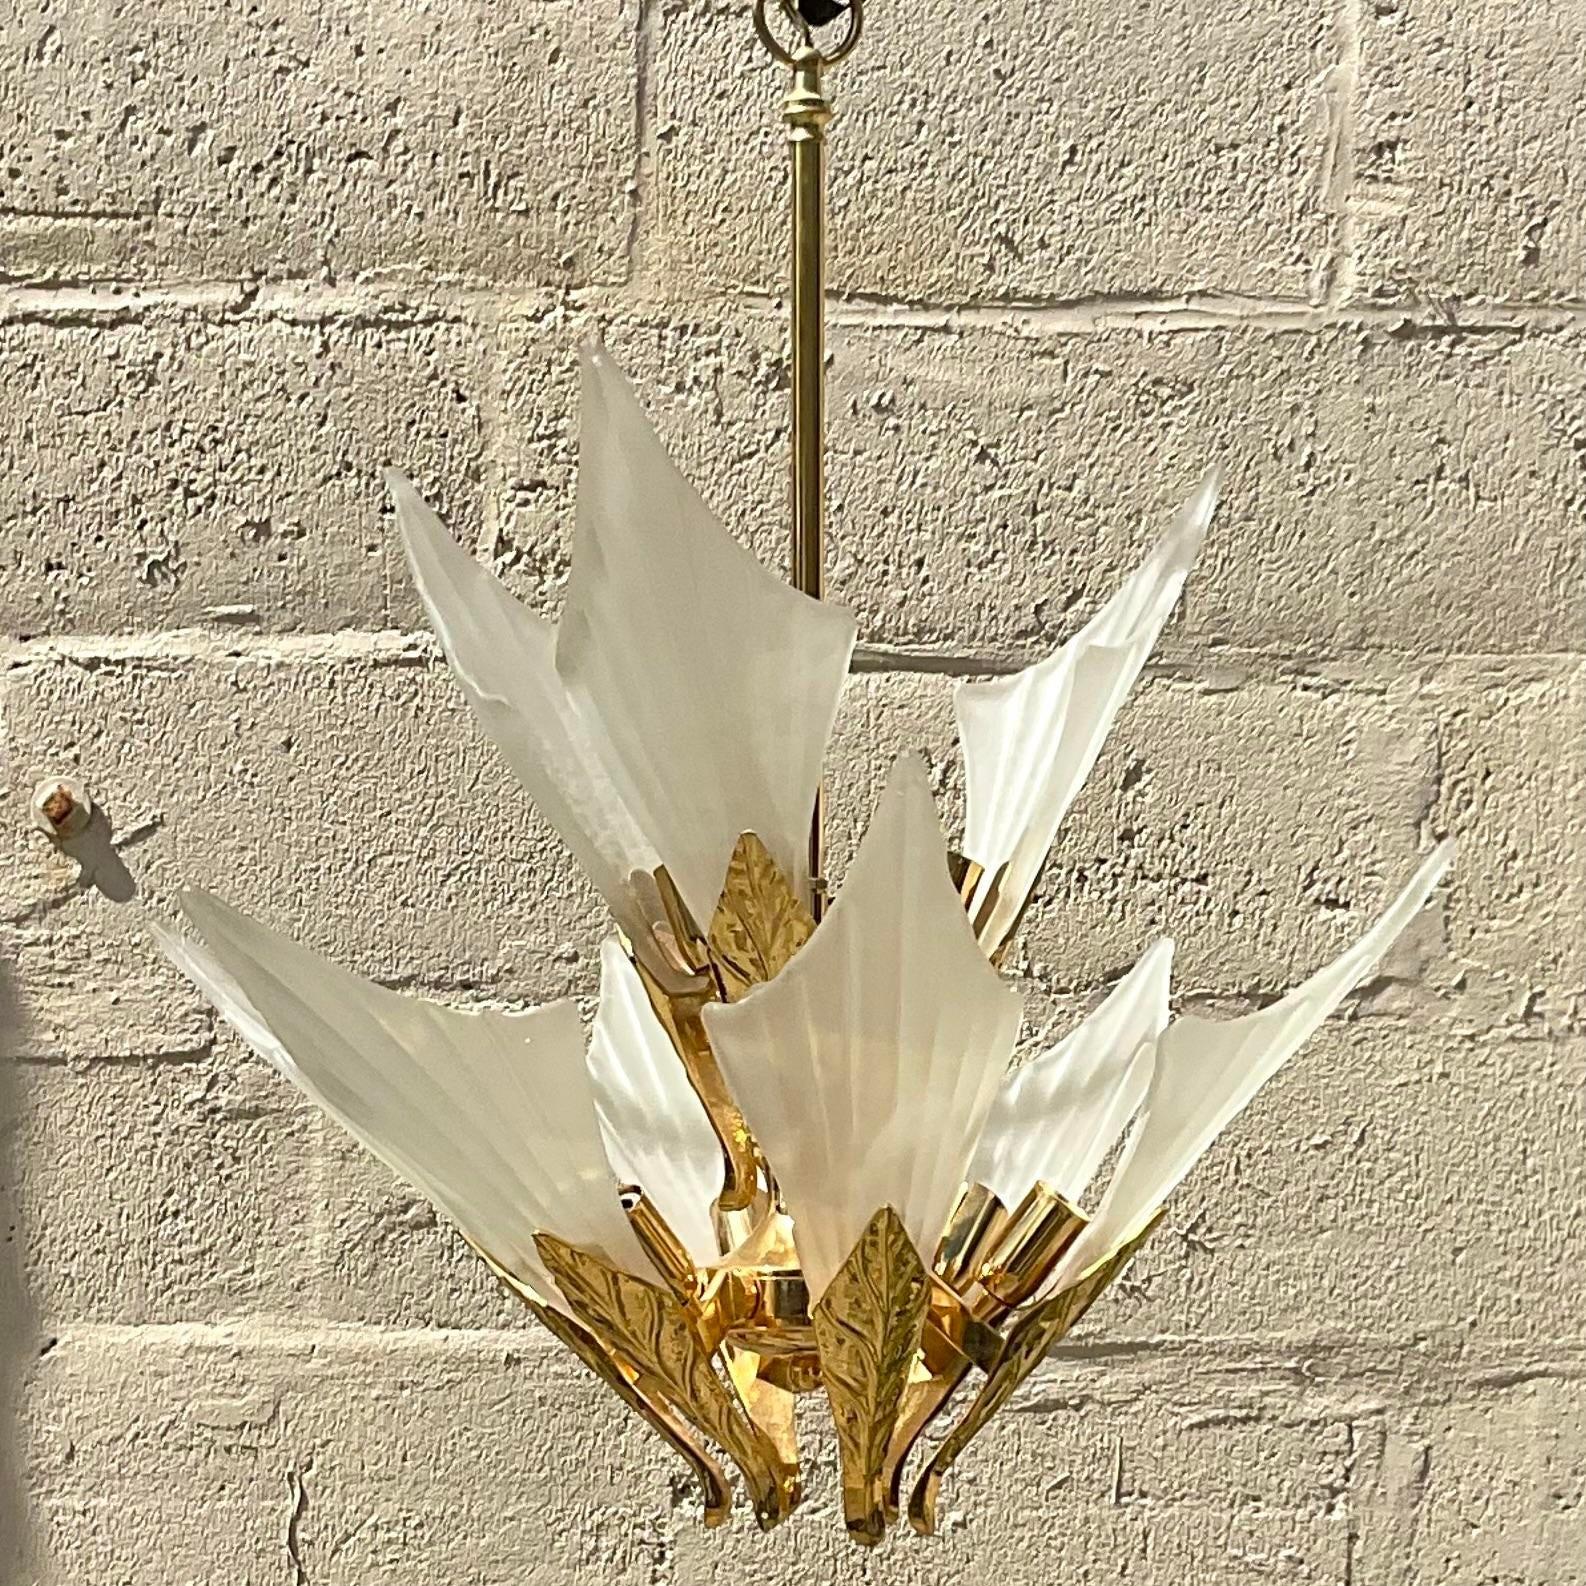 A fabulous vintage Boho chandelier. A chic frosted glass leaf design with brass leaf detail. Made by the iconic Murano group. Acquired from a Palm a each estate.